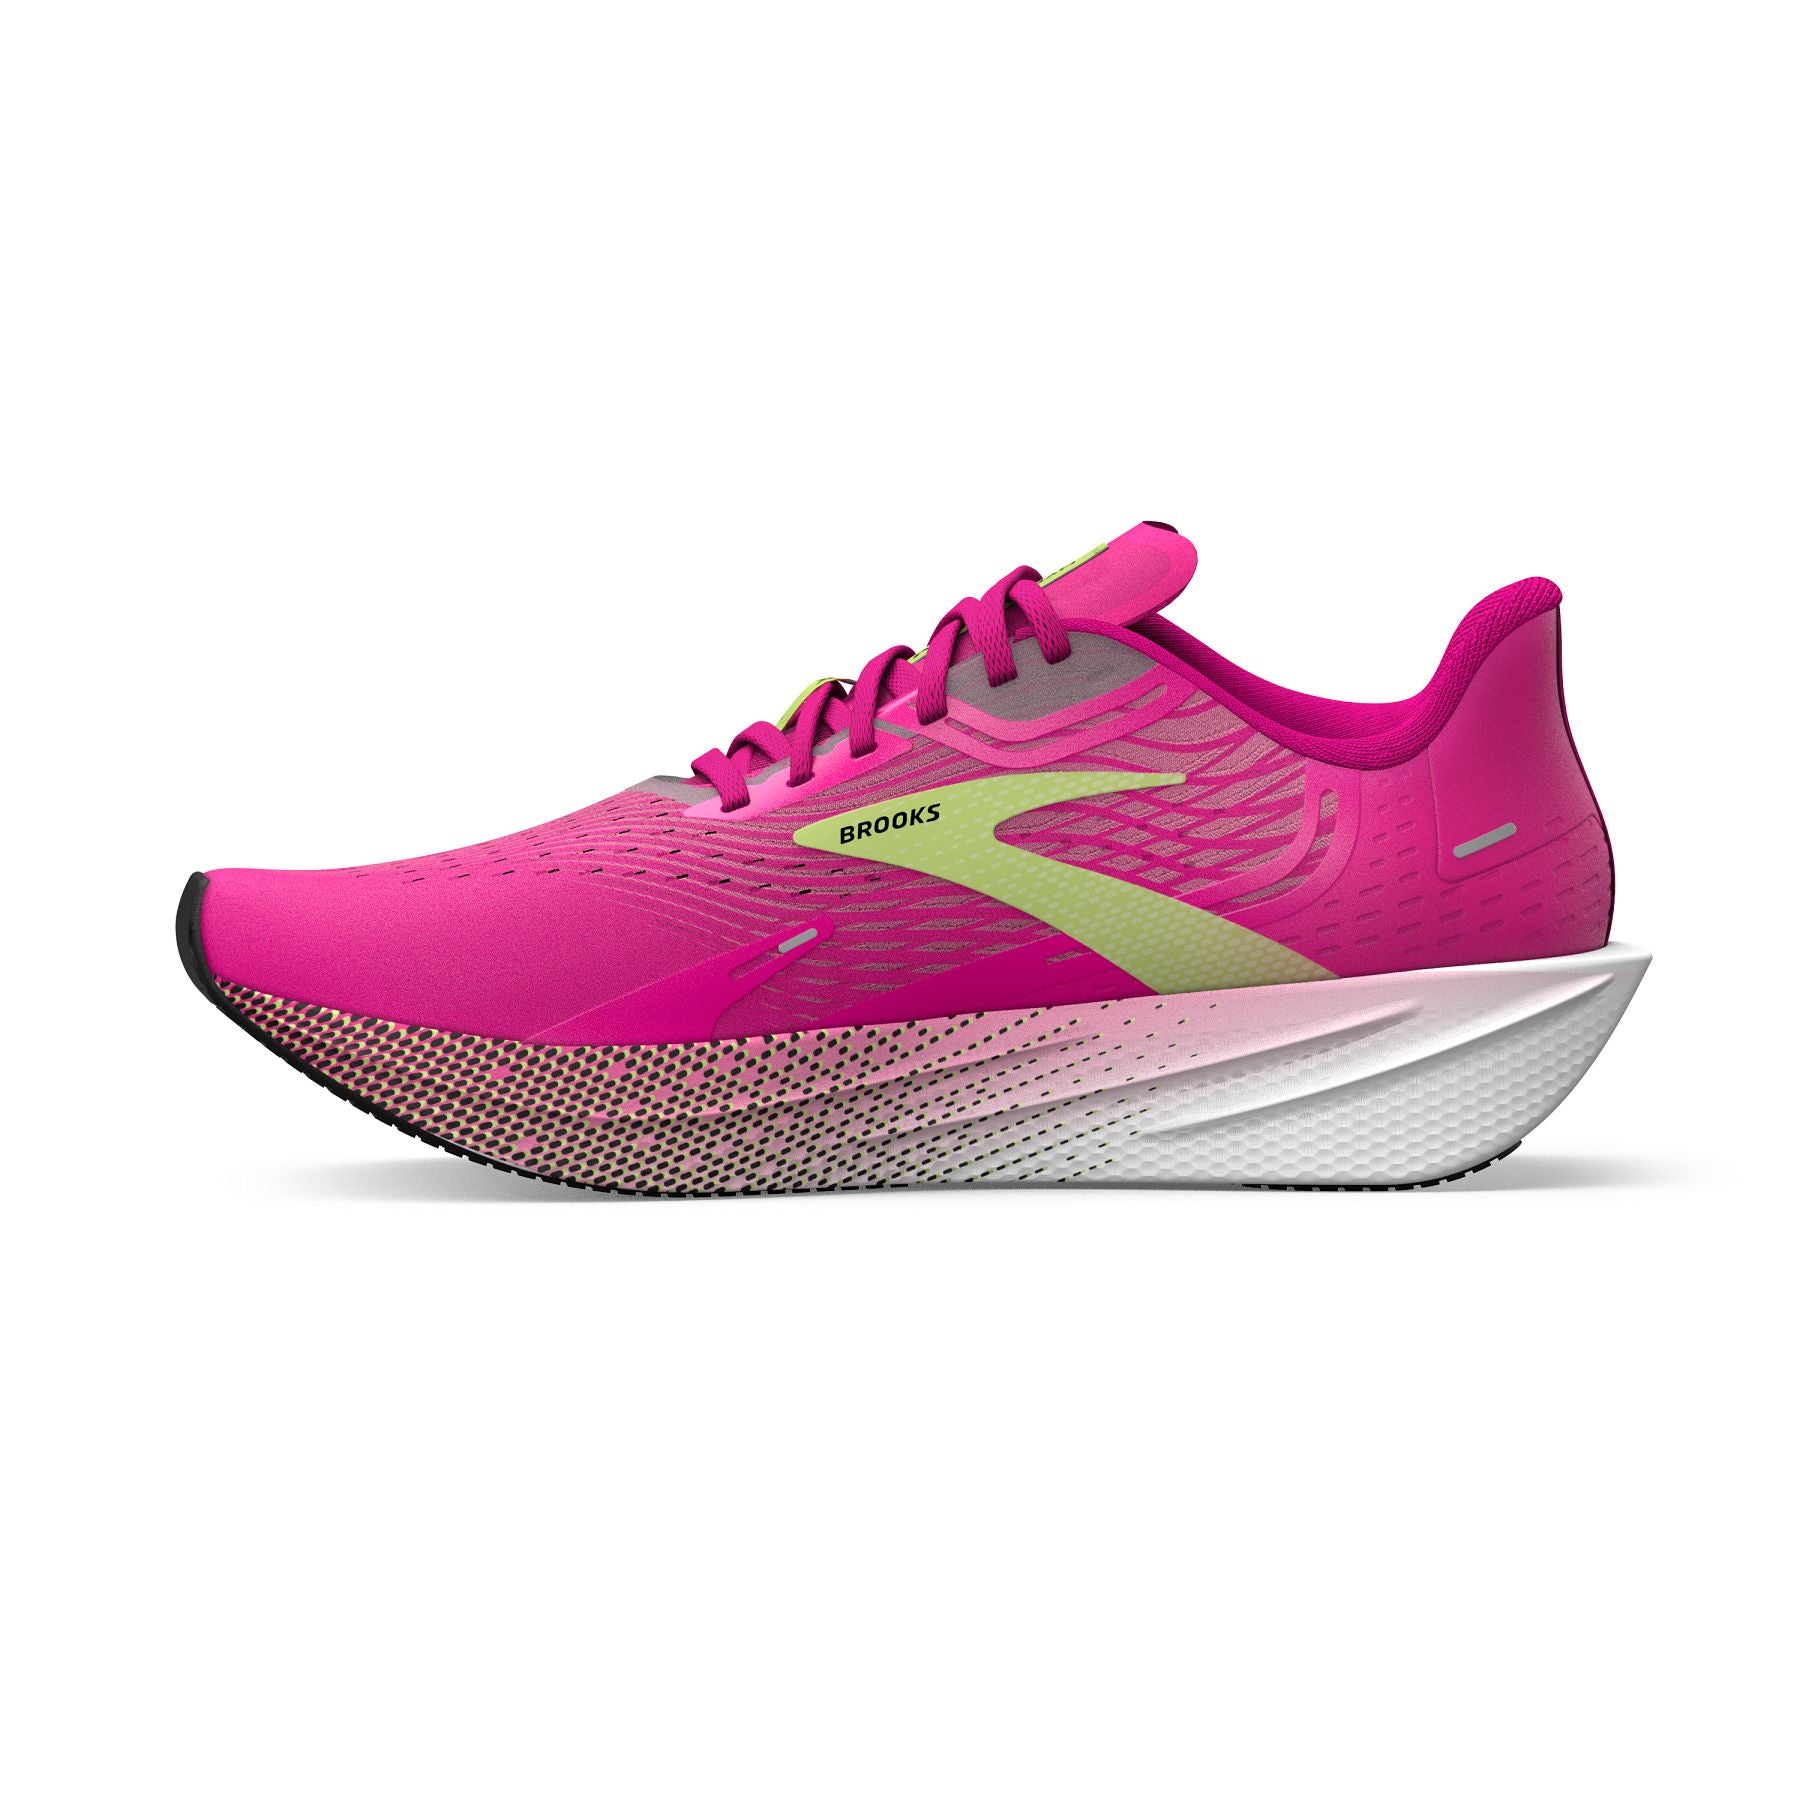 Medial view of the Women's Hyperion Max by Brook's in the color Pink Glo/Green/Black